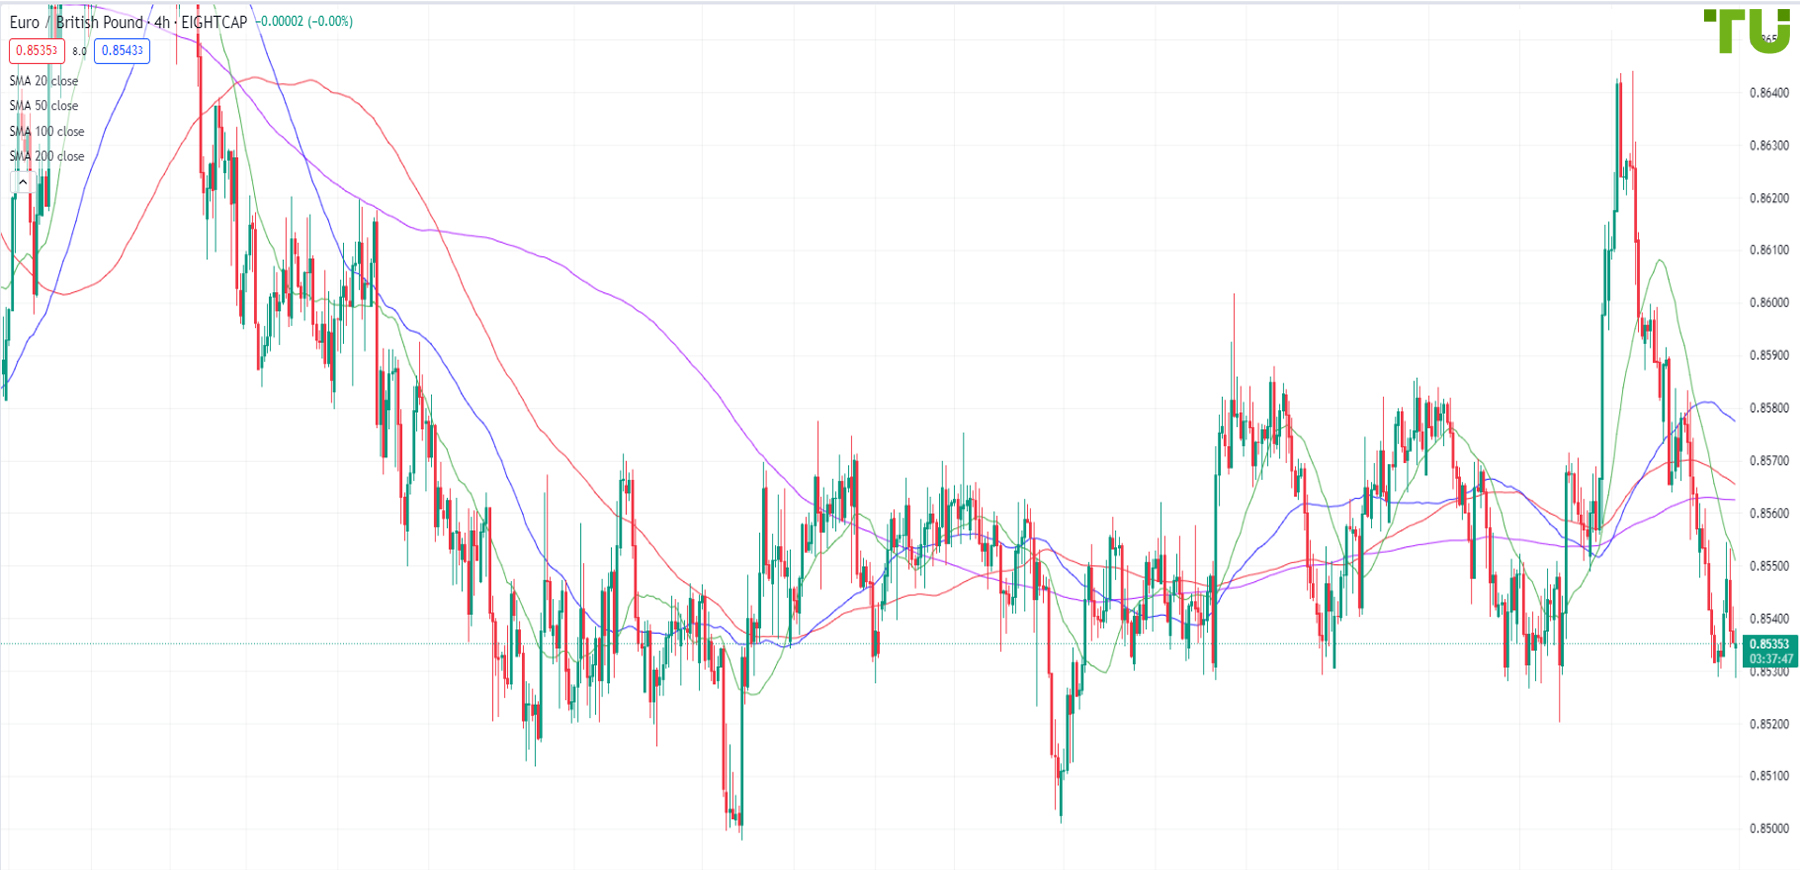 EUR/GBP is sold on the pullback